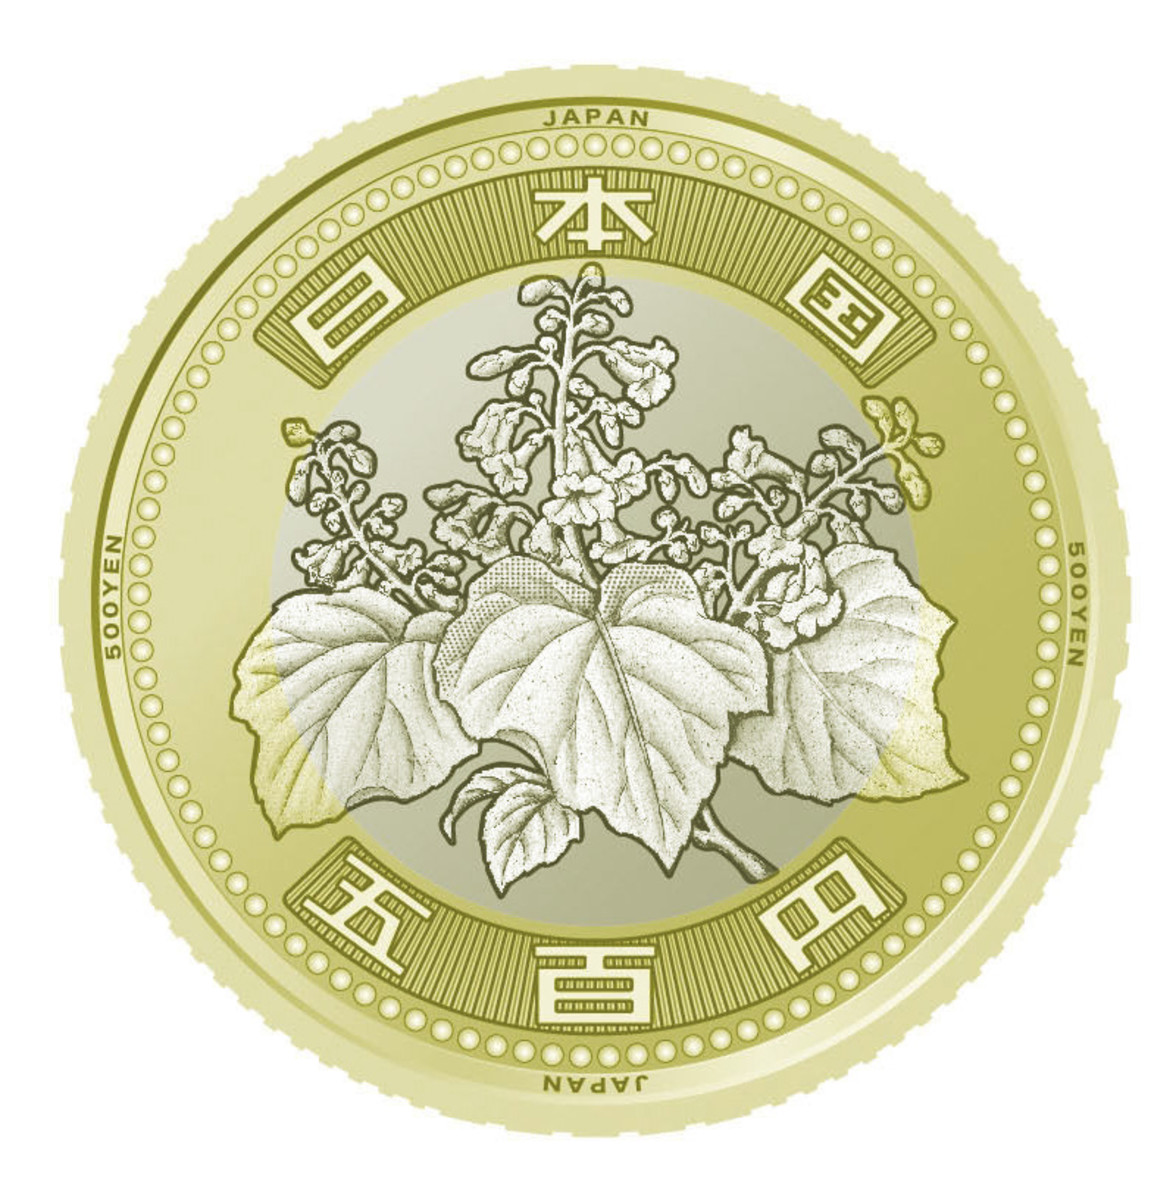 Japan to Issue Redesigned 500-Yen Coin